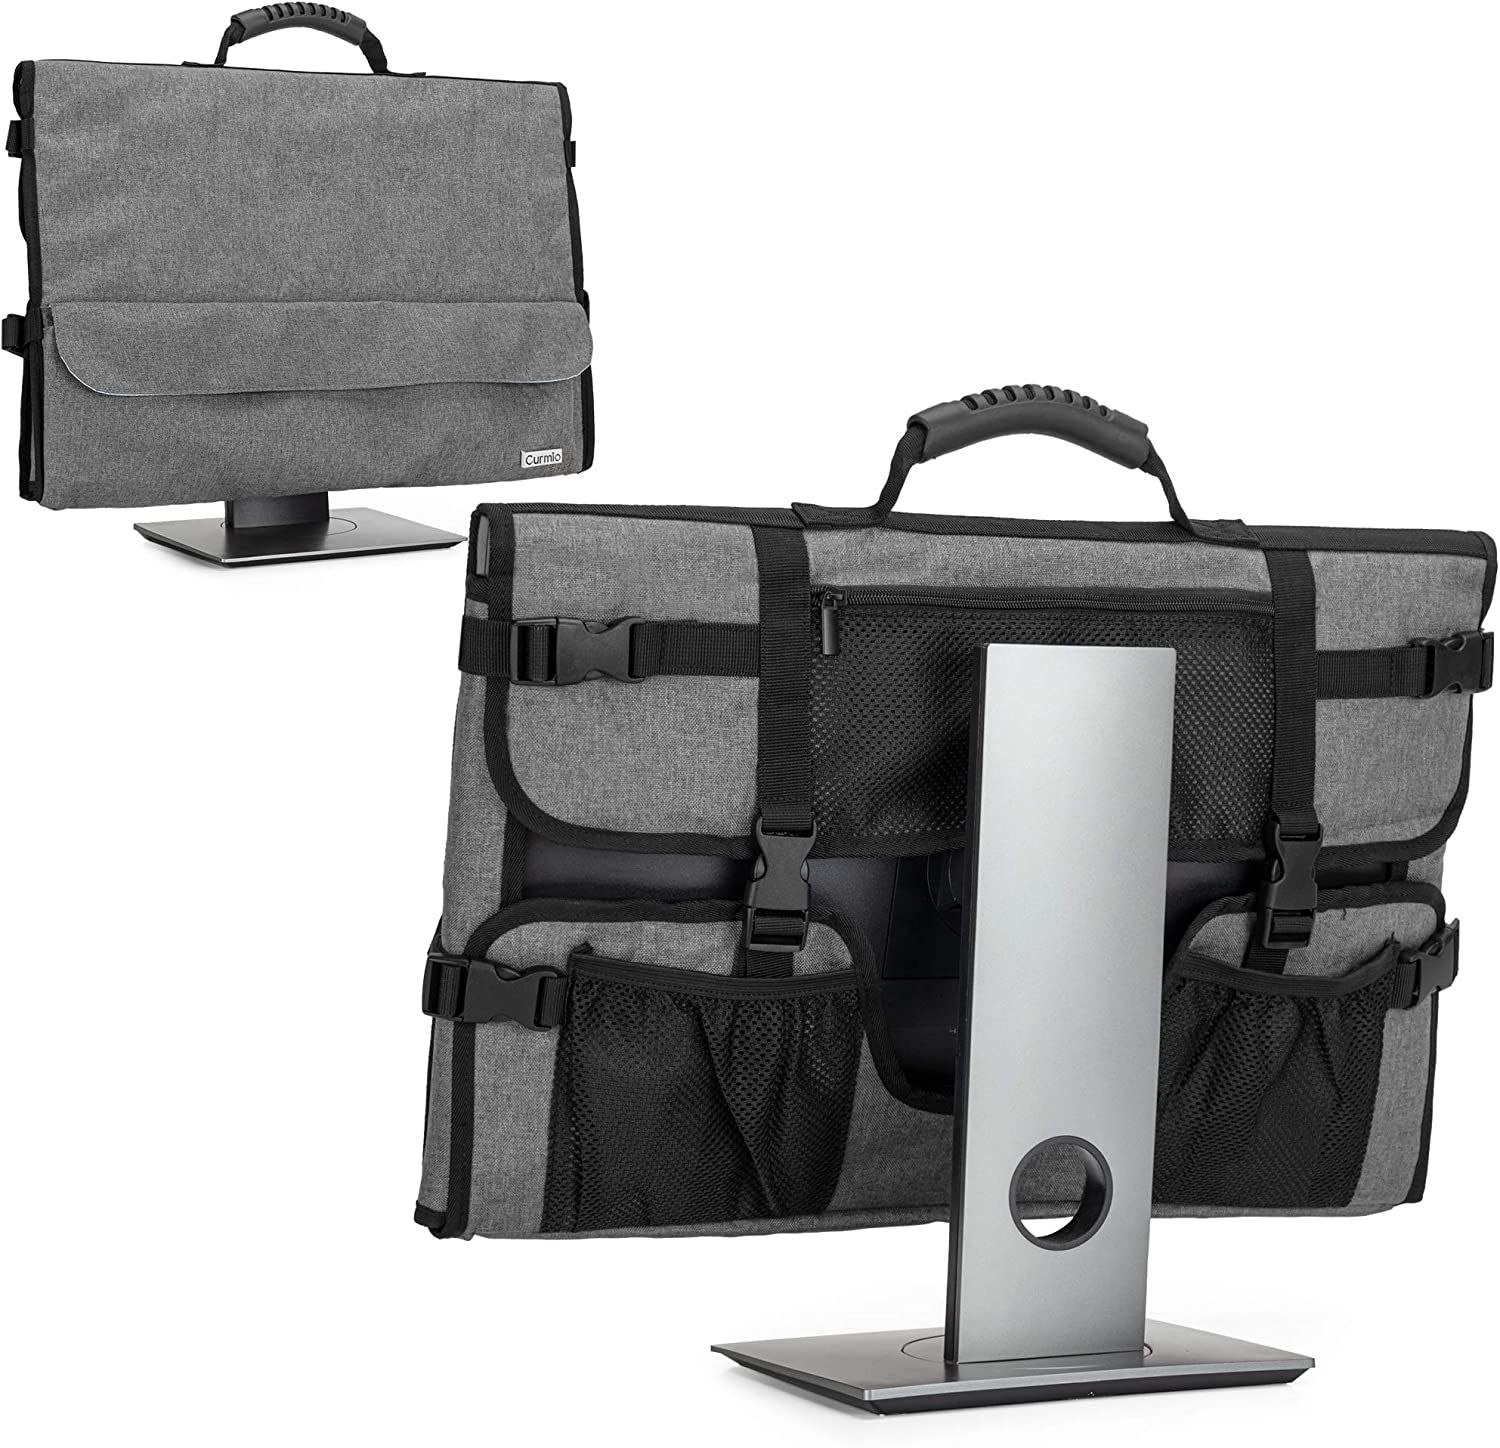 The CURMIO 24-Inch Monitor Carrying Case, displaying both front and back views.